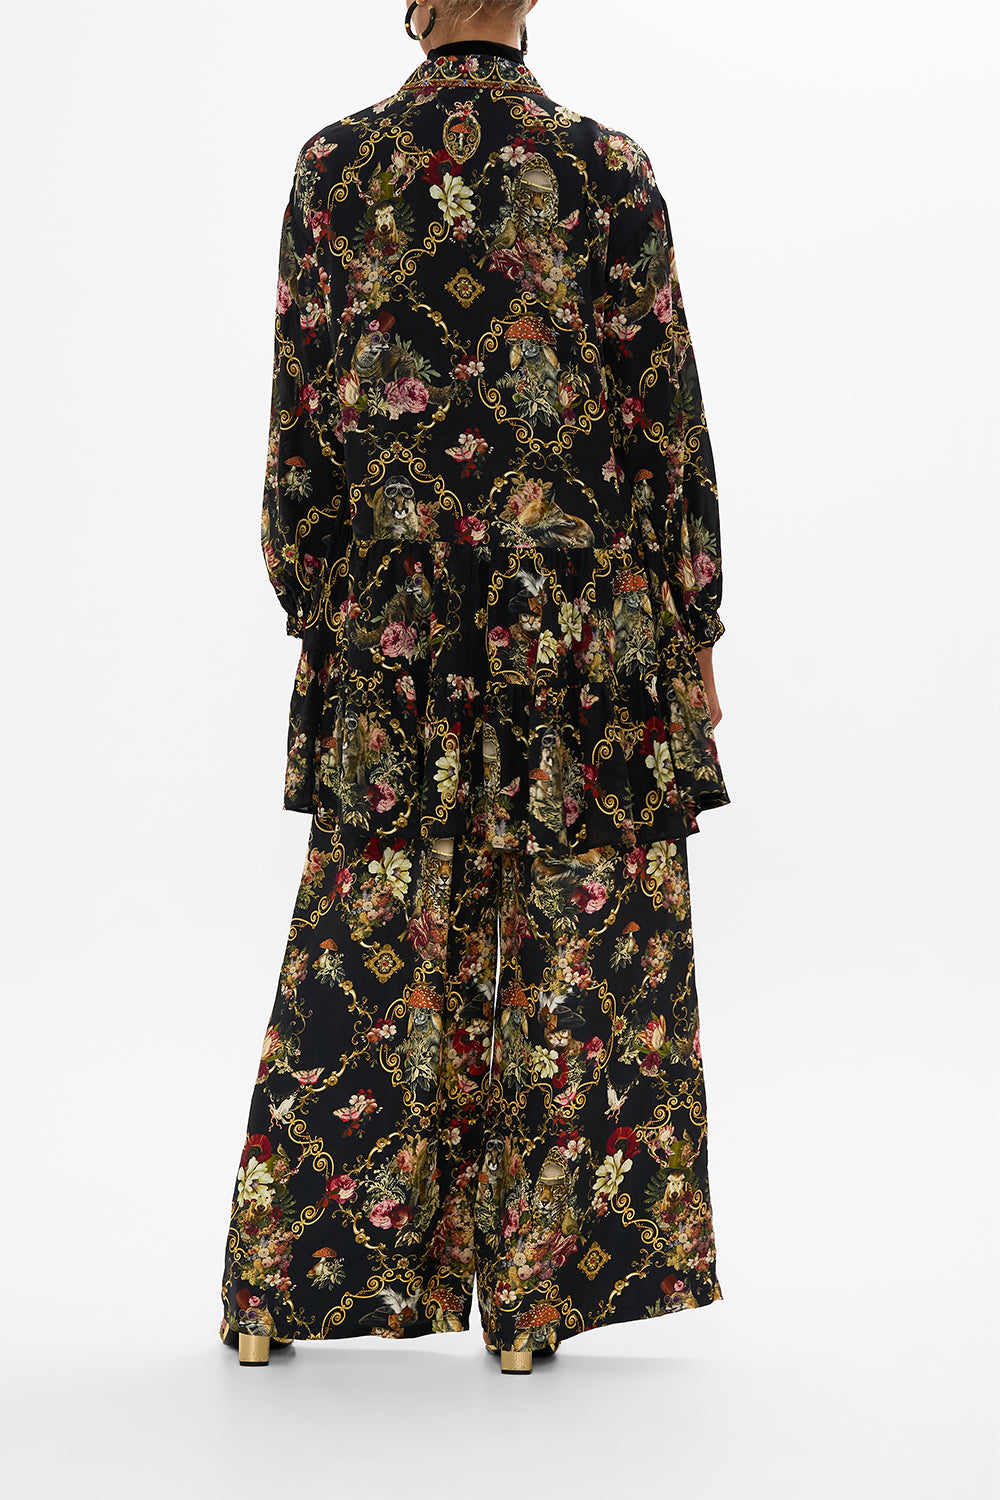 CAMILLA Black Tiered Shirt Dress in Told in the Tapestry